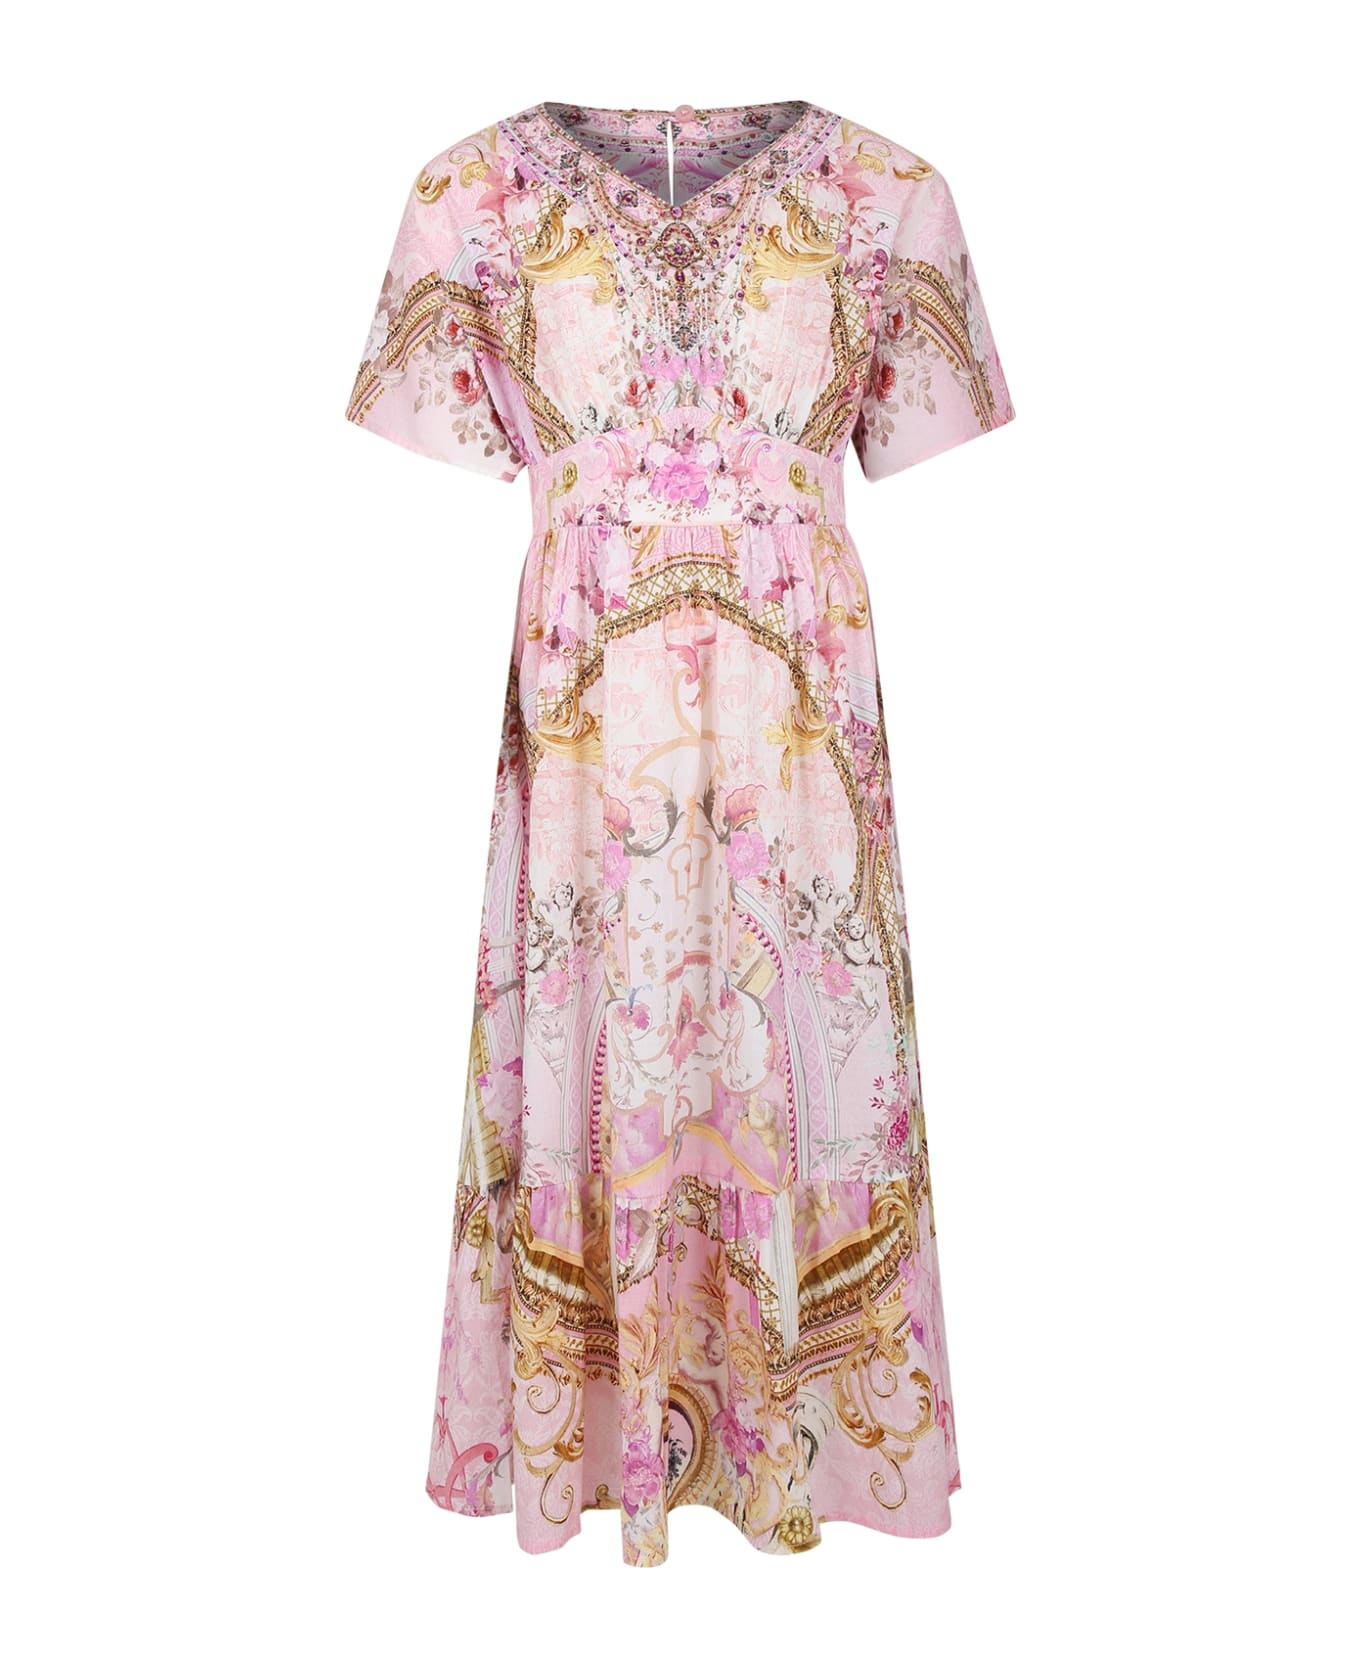 Camilla Pink Dress For Girl With Floral Print - Pink ワンピース＆ドレス